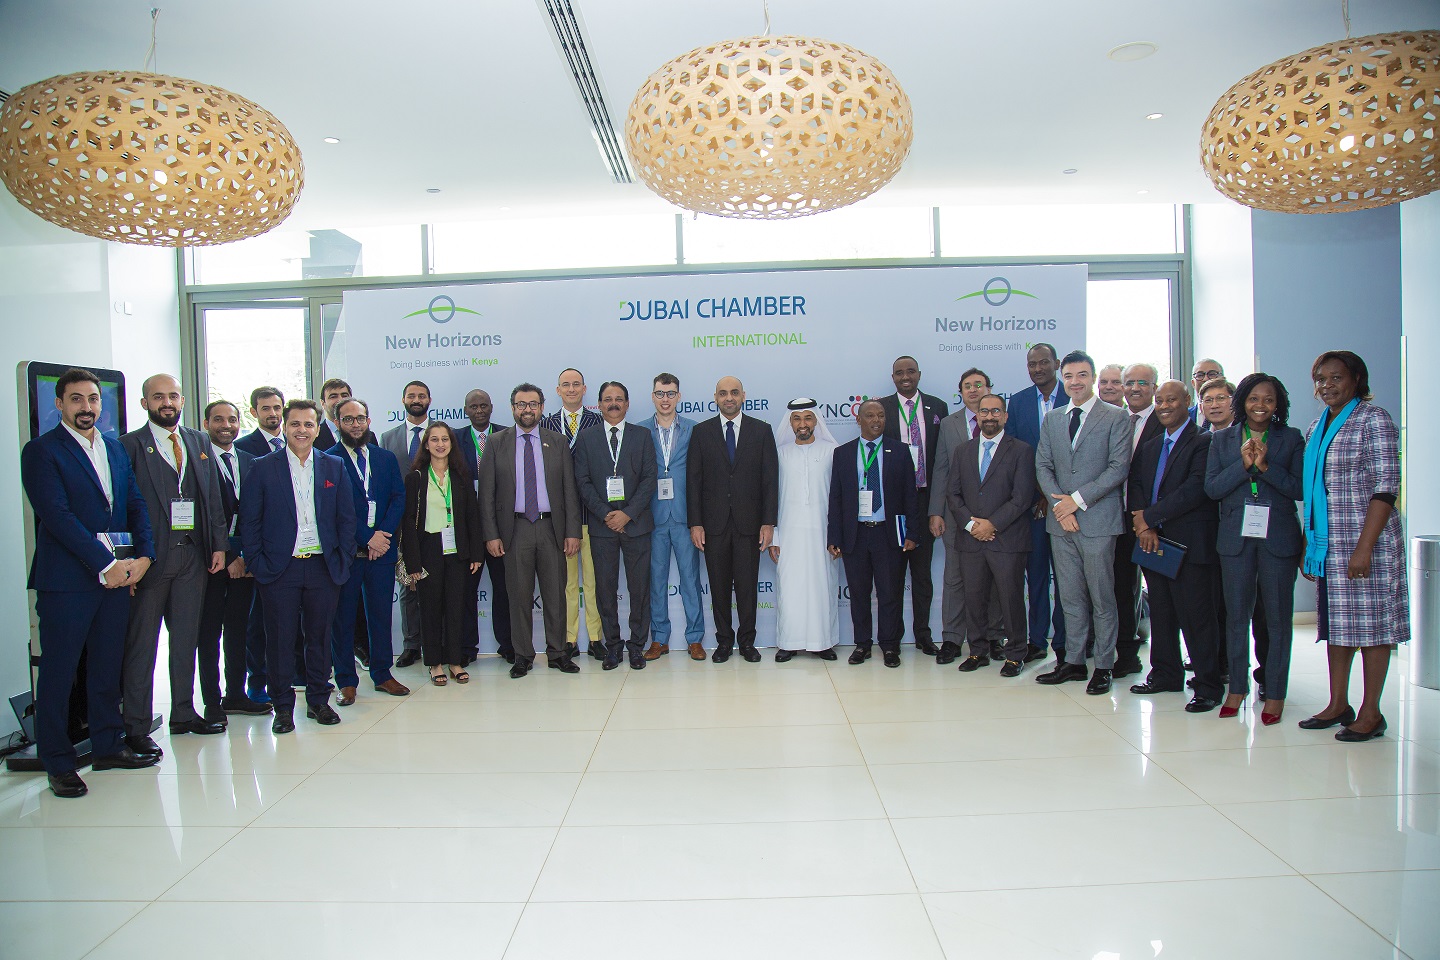 Dubai International Chamber successfully concludes East Africa trade mission with economic forum in Kenya and facilitates over 250 bilateral business meetings